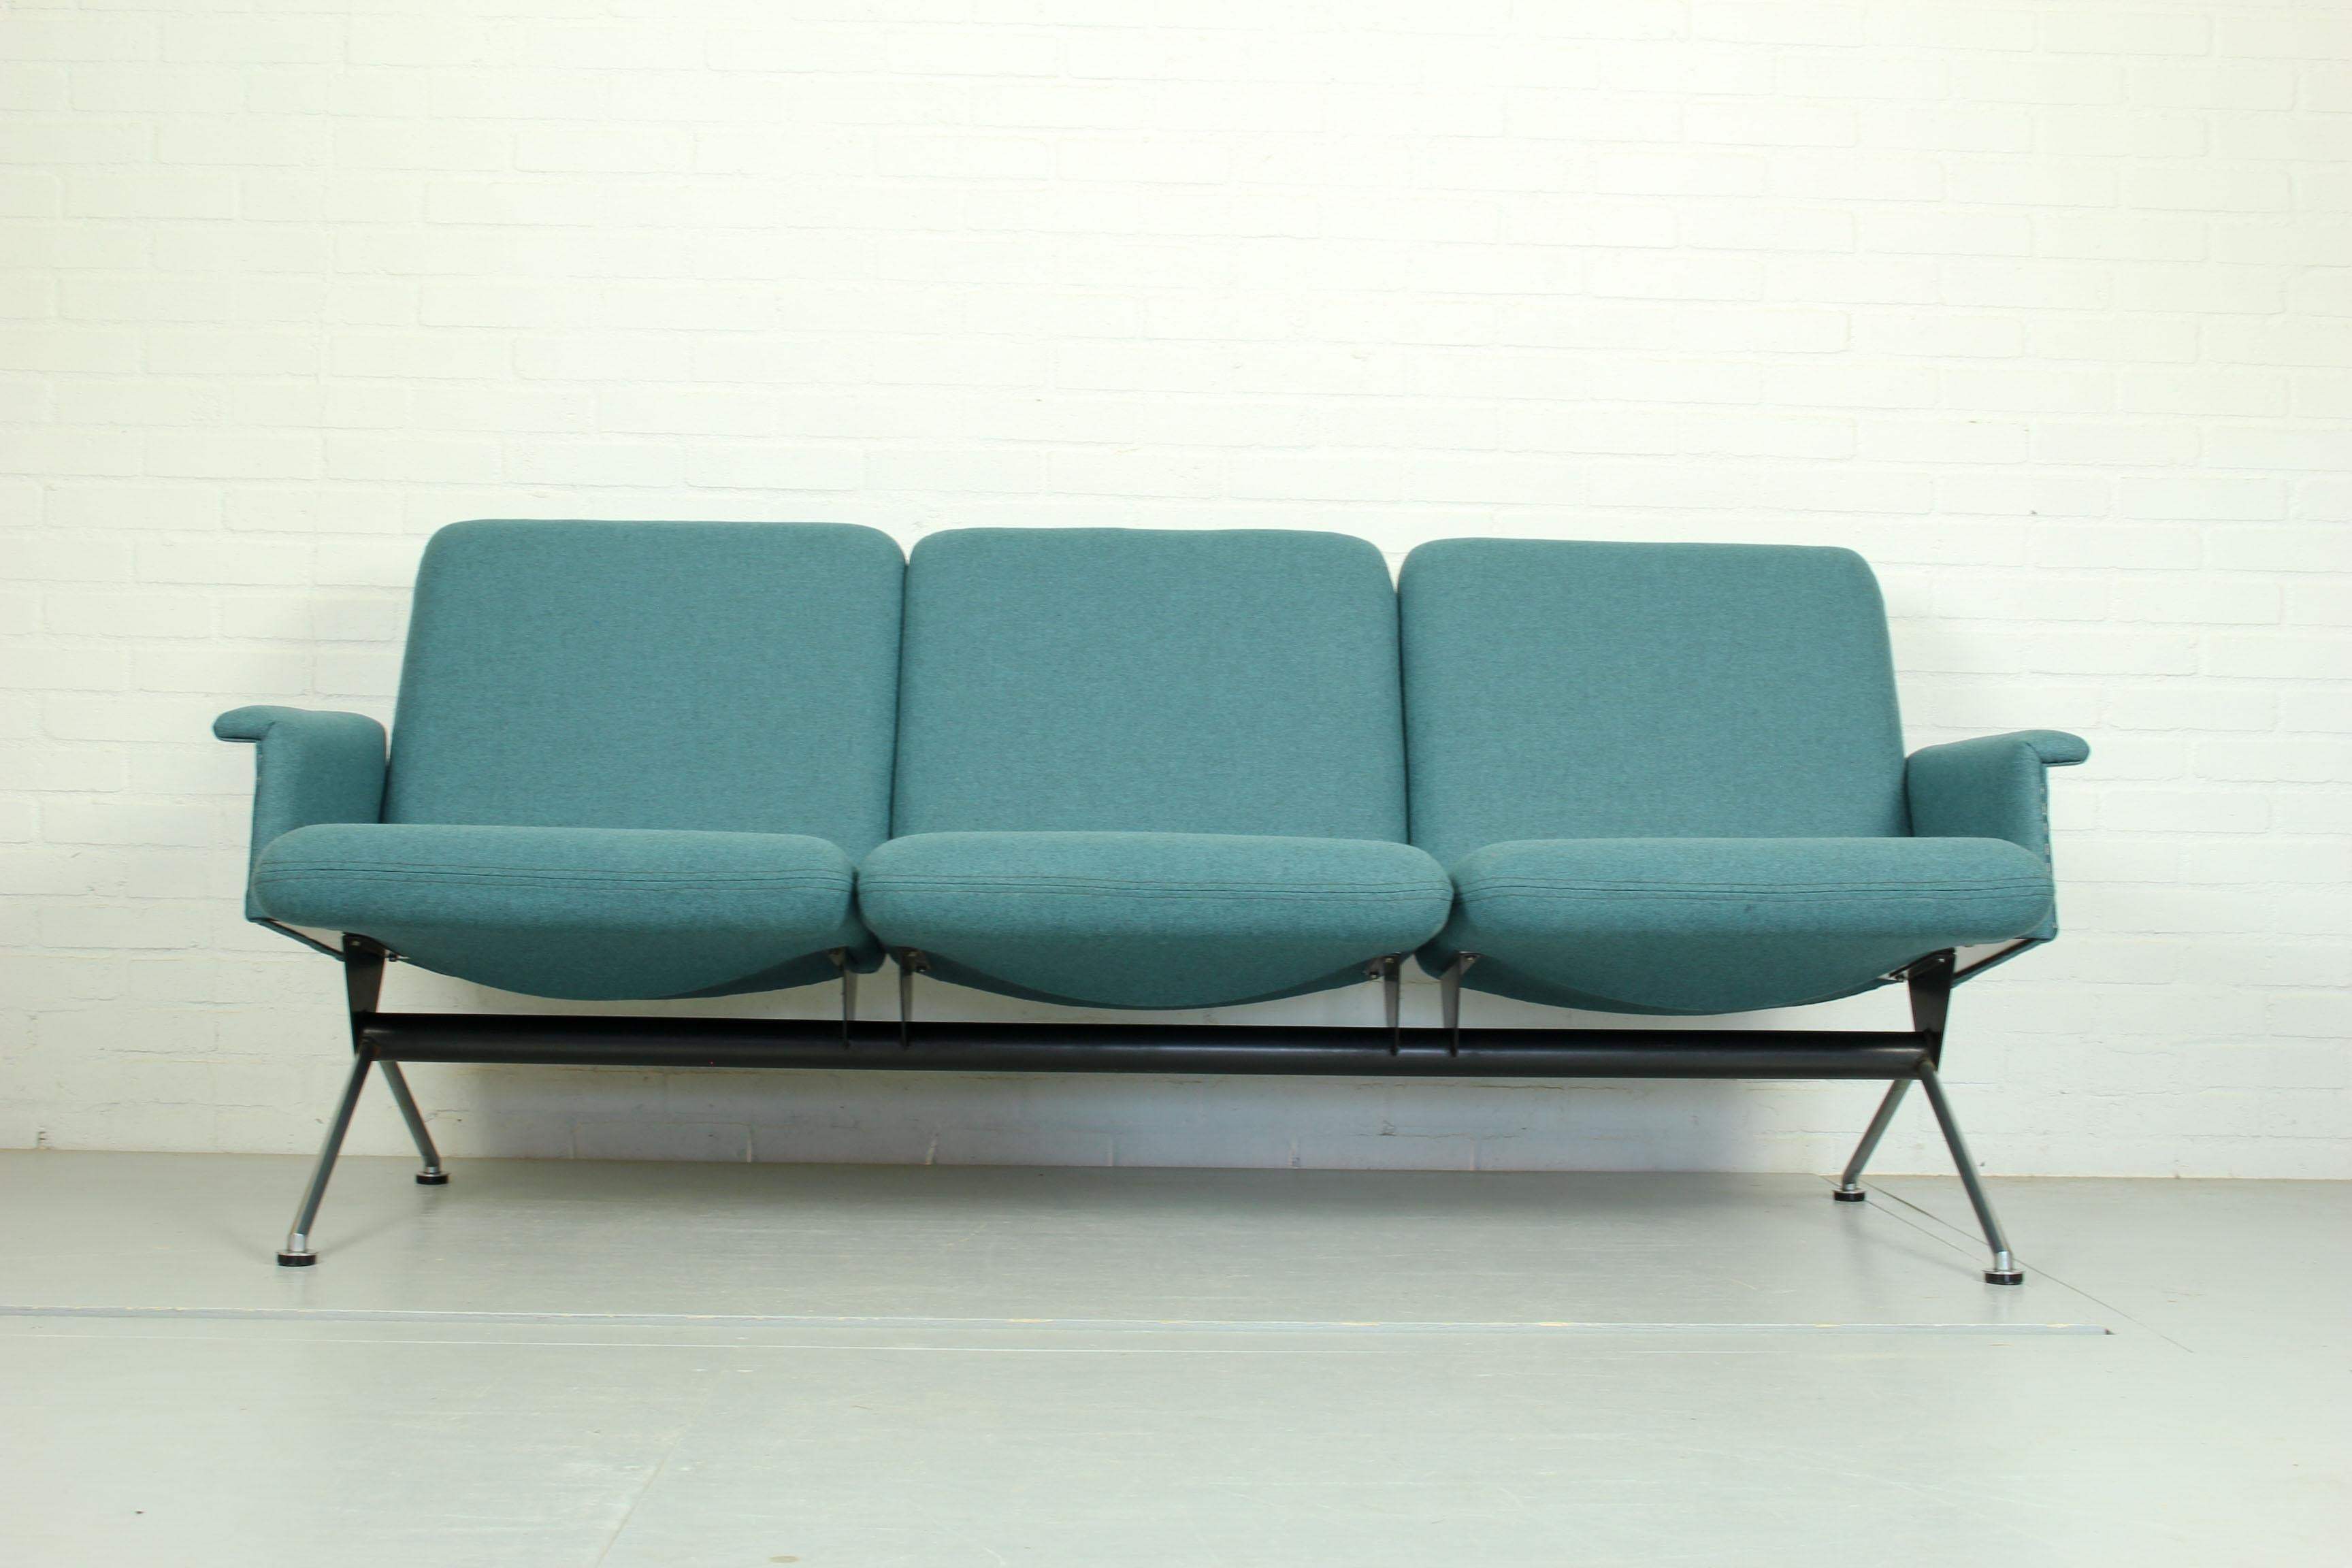 20th Century Lounge Set by Andre Cordemeyer for Gispen, 1432 '2' and 1715, 1961